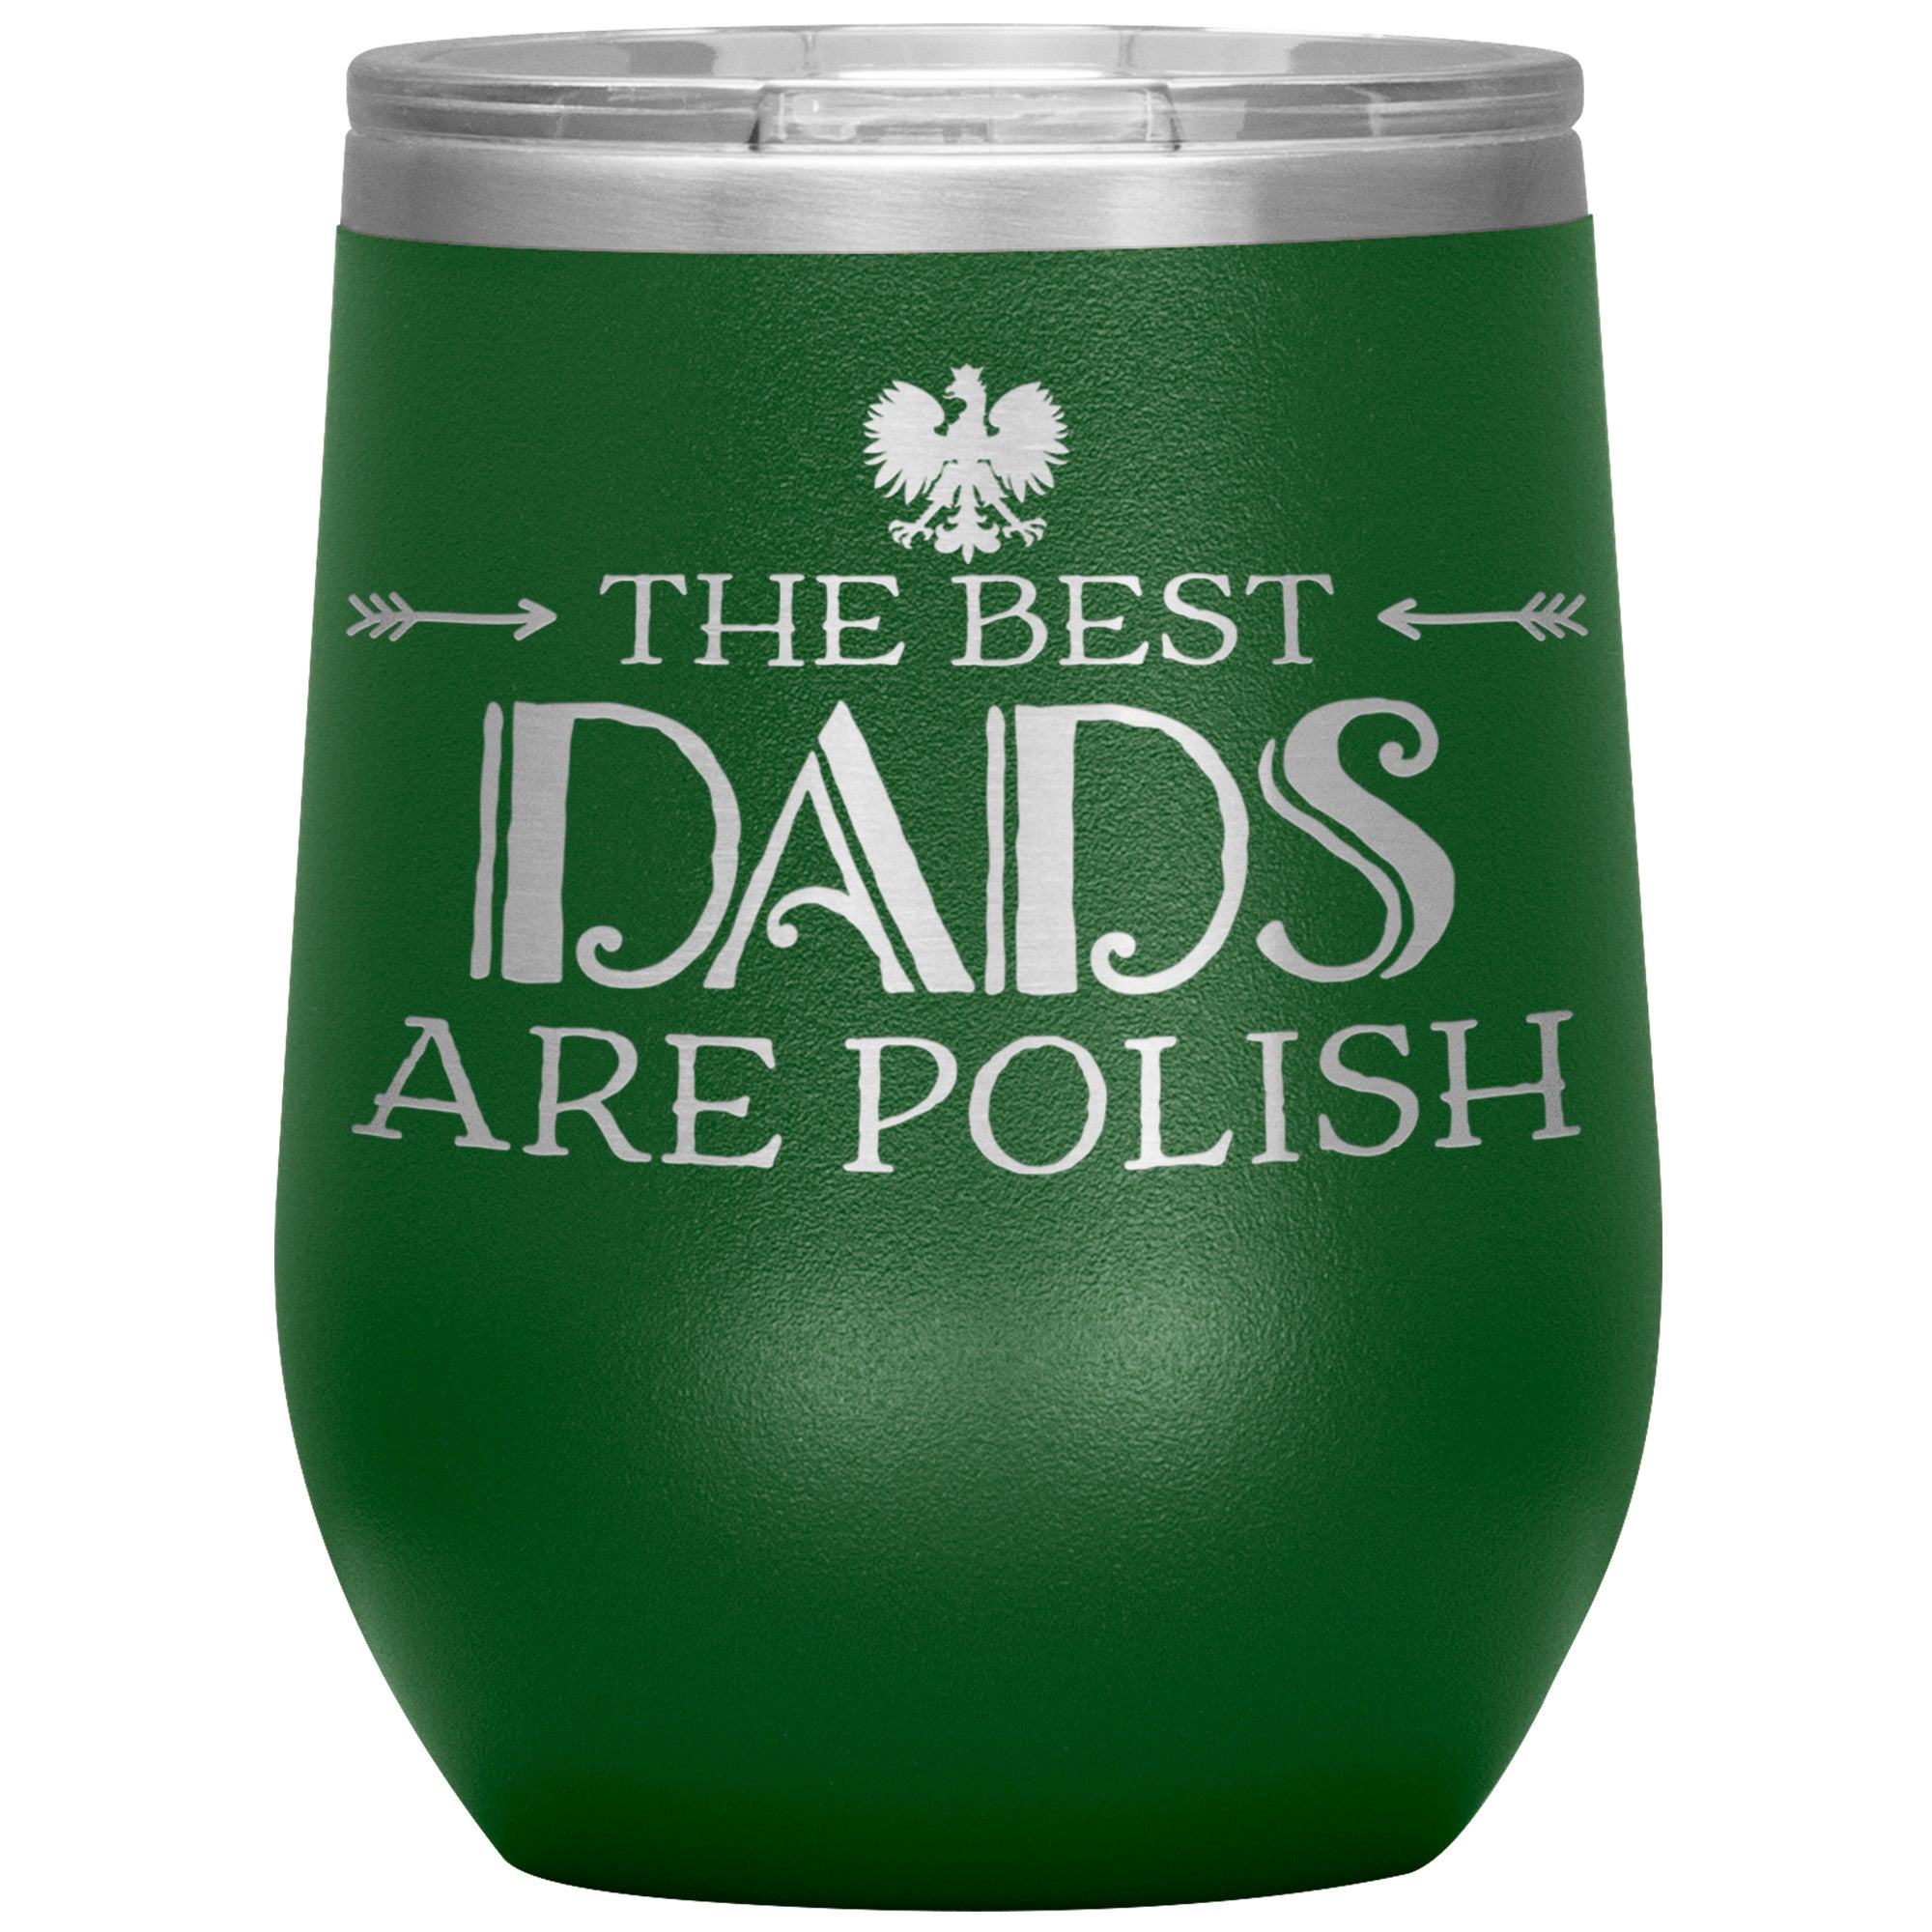 The Best Dads Are Polish Insulated Wine Tumbler Tumblers teelaunch Green  